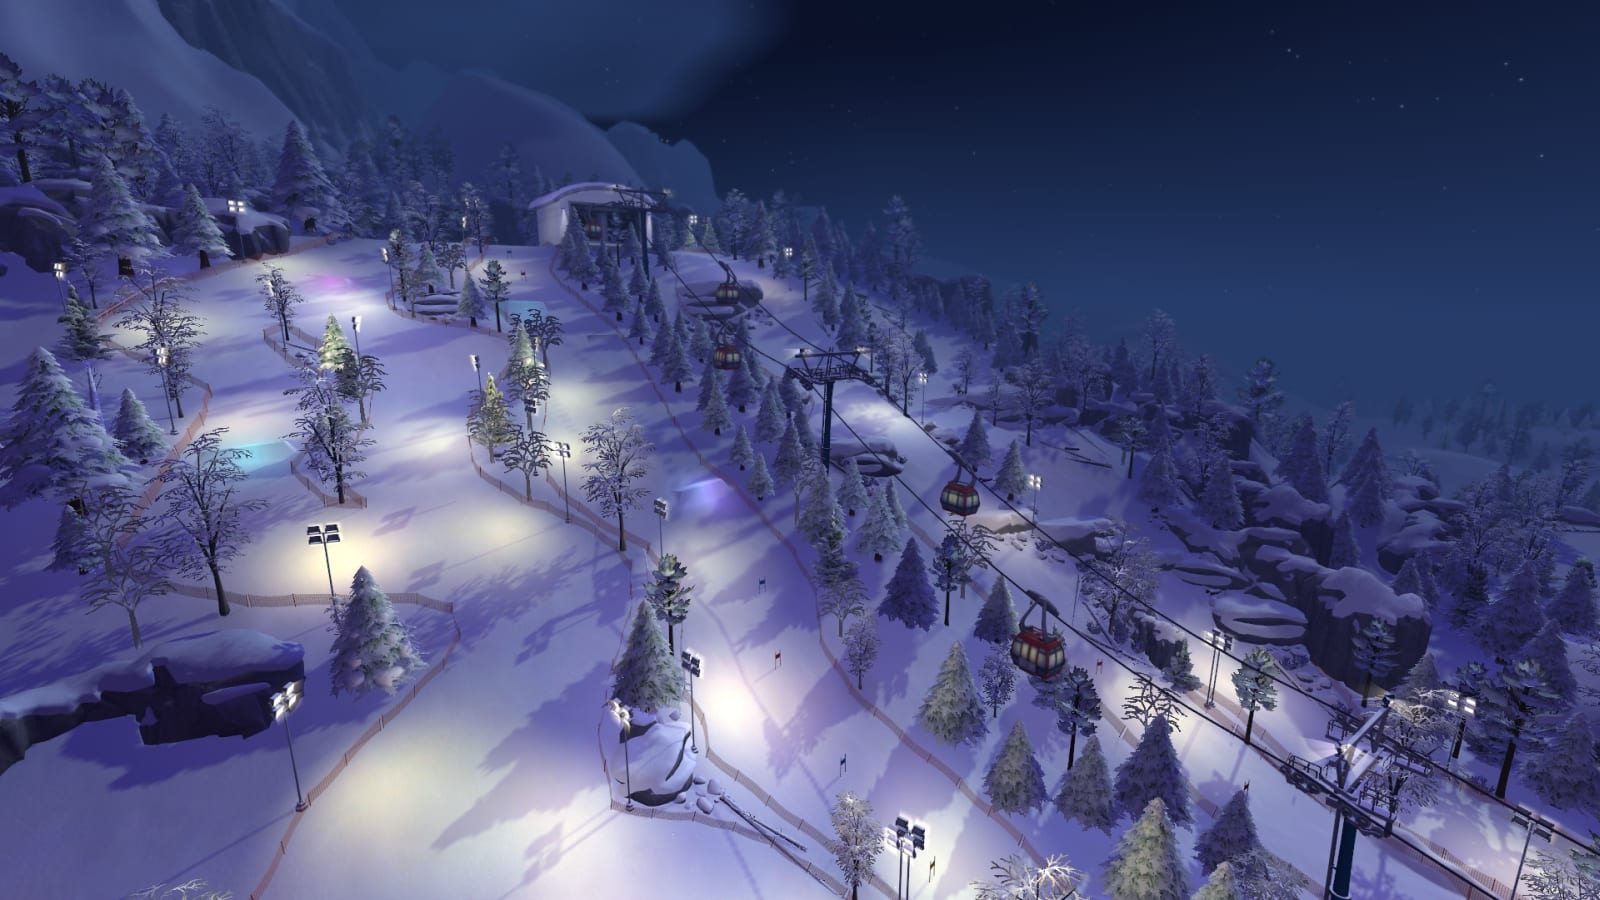 Get Gnarly on the Pow Pow —The Sims 4 Snowy Escape expansion pack